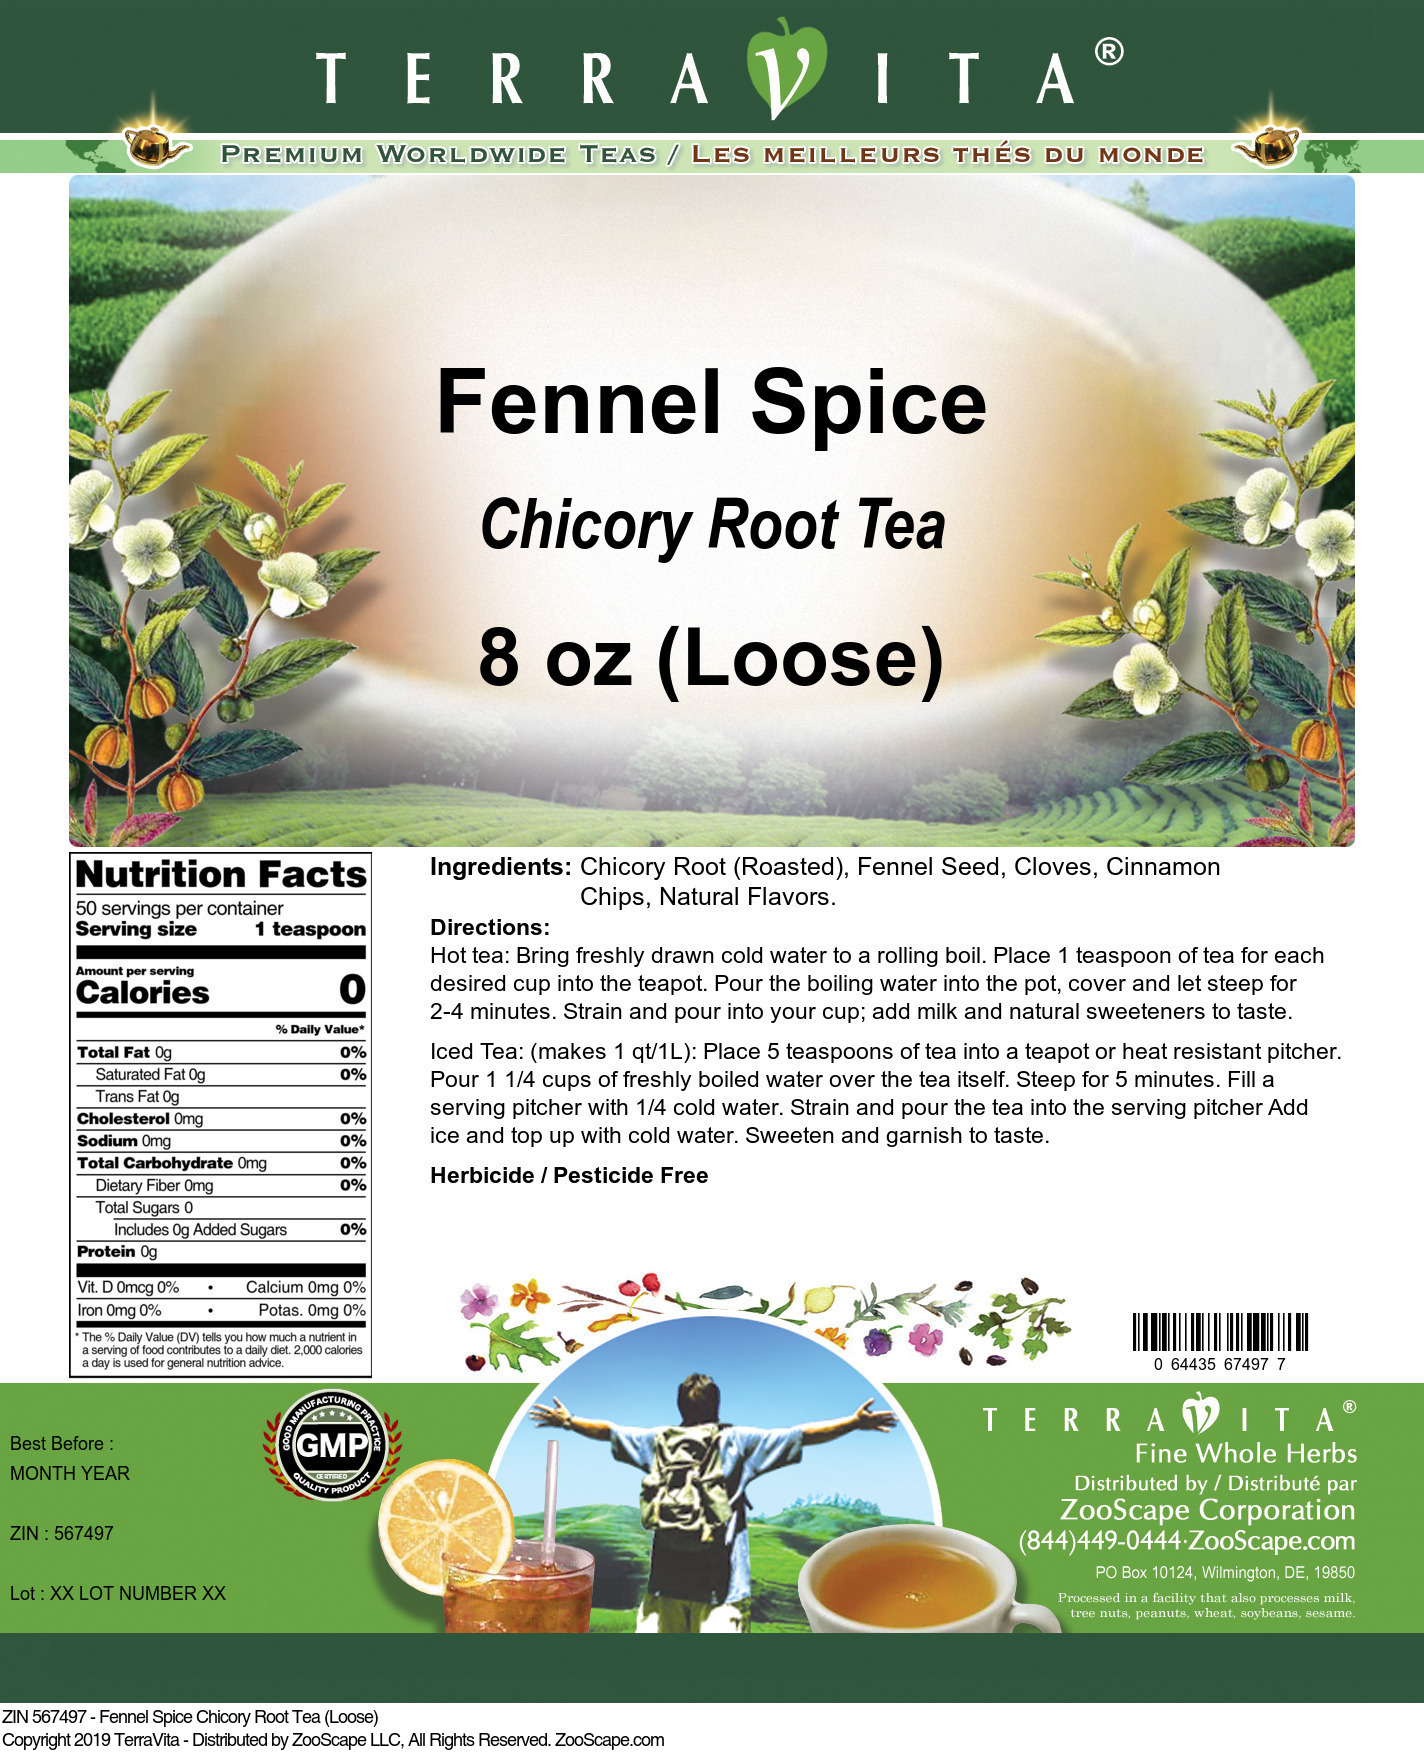 Fennel Spice Chicory Root Tea (Loose) - Label